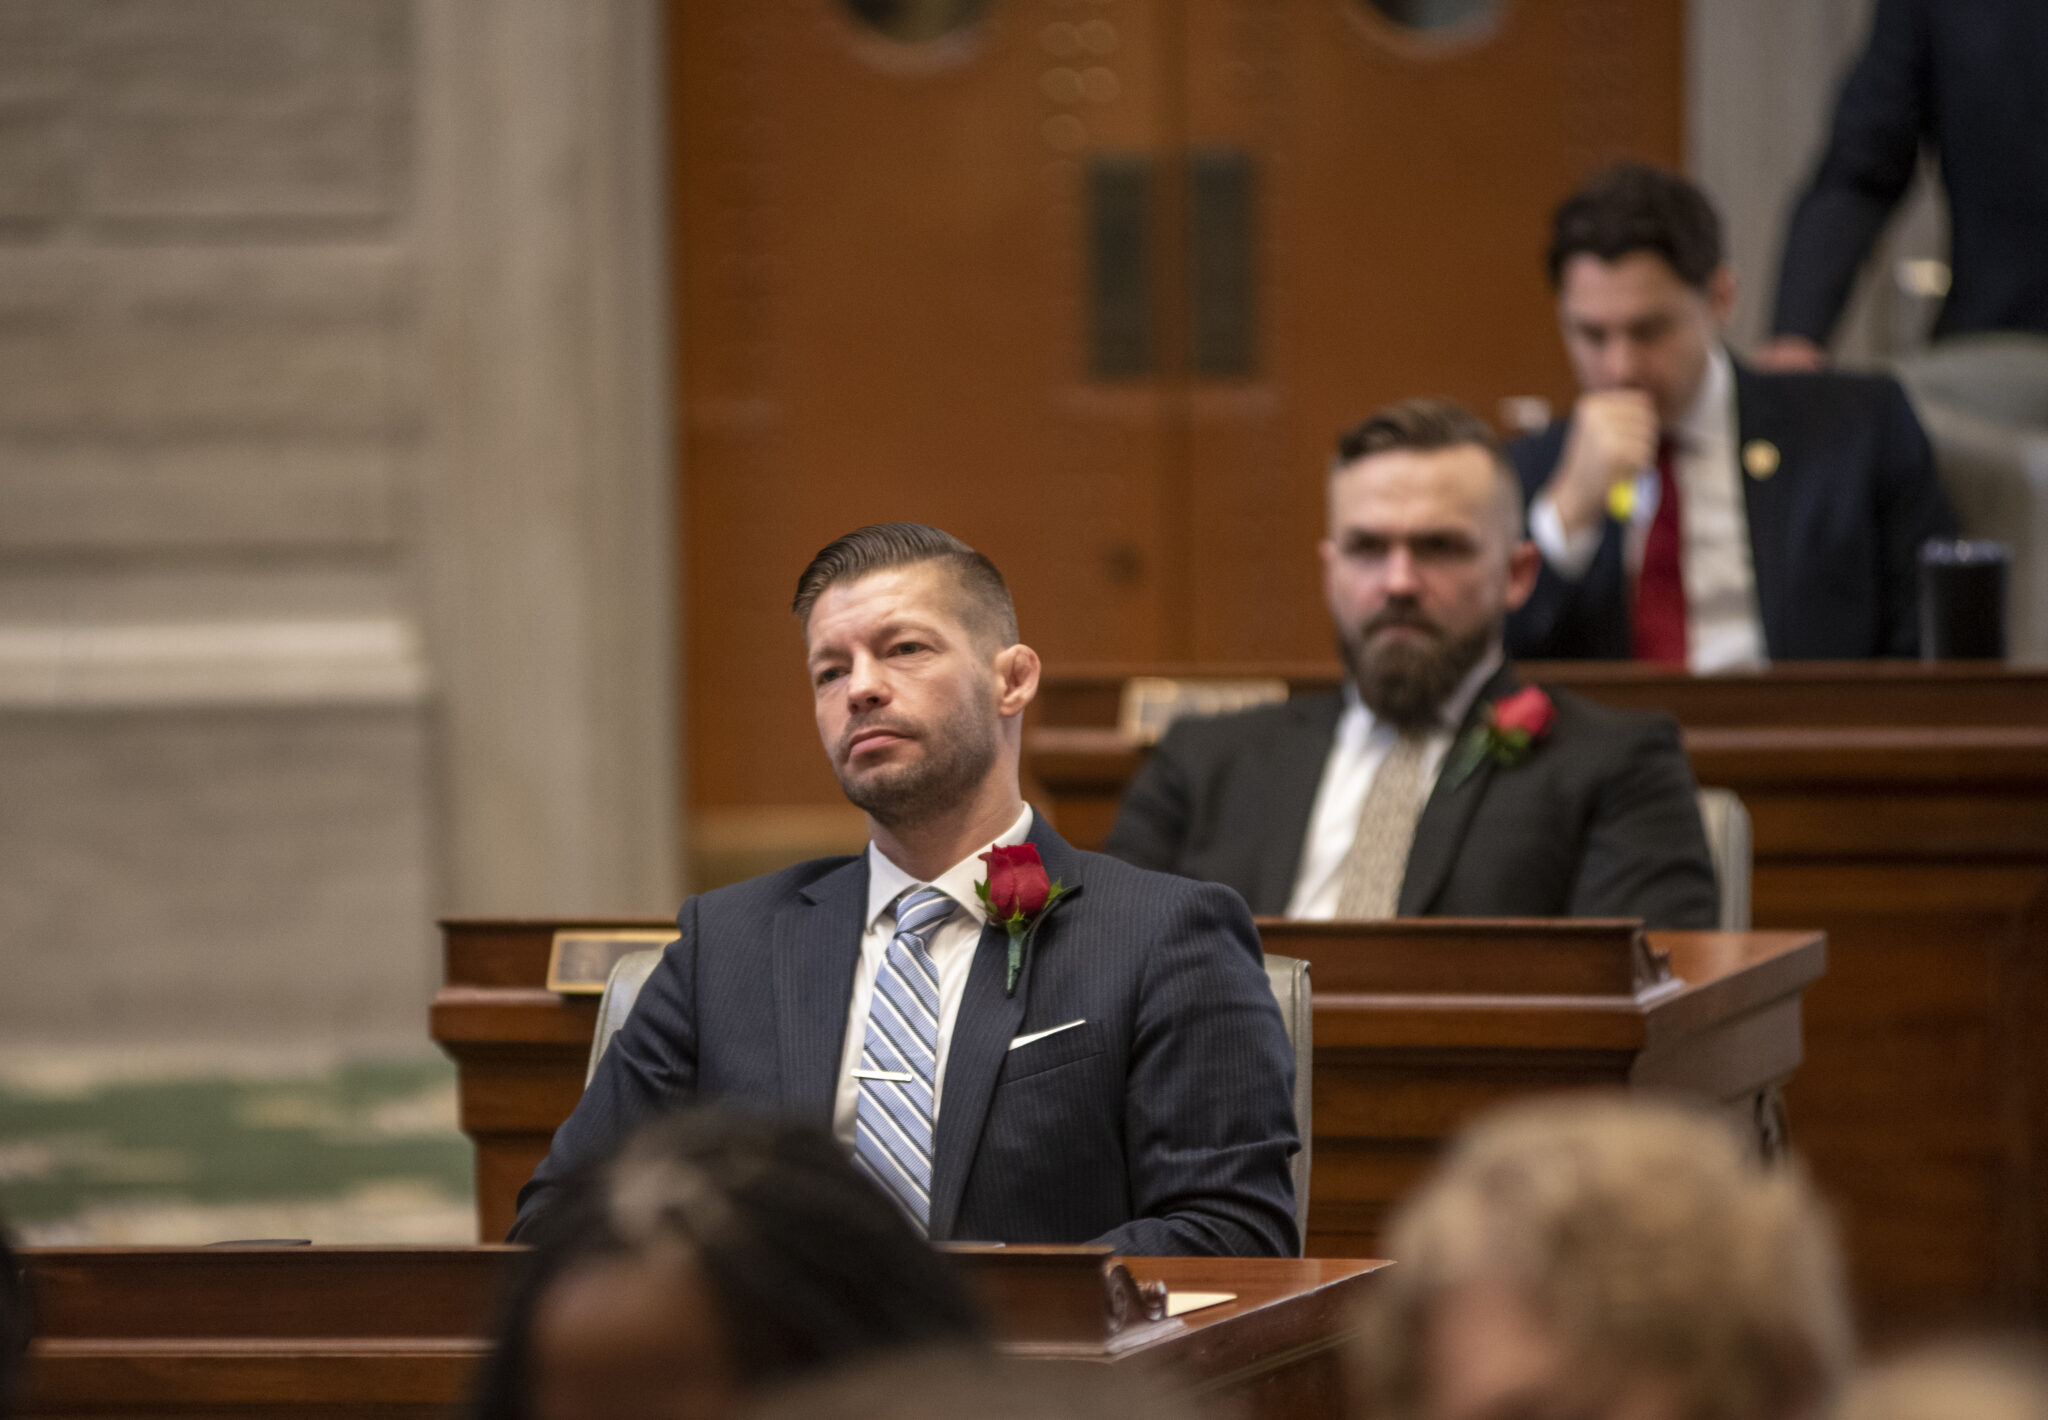 Sen. Ben Brown, R-Washington, listens during the first day of Missouri’s legislative session January 4, 2023. He pre-filed a bill aiming to give parents more access to curriculum and learning materials. (Annelise Hanshaw/Missouri Independent)